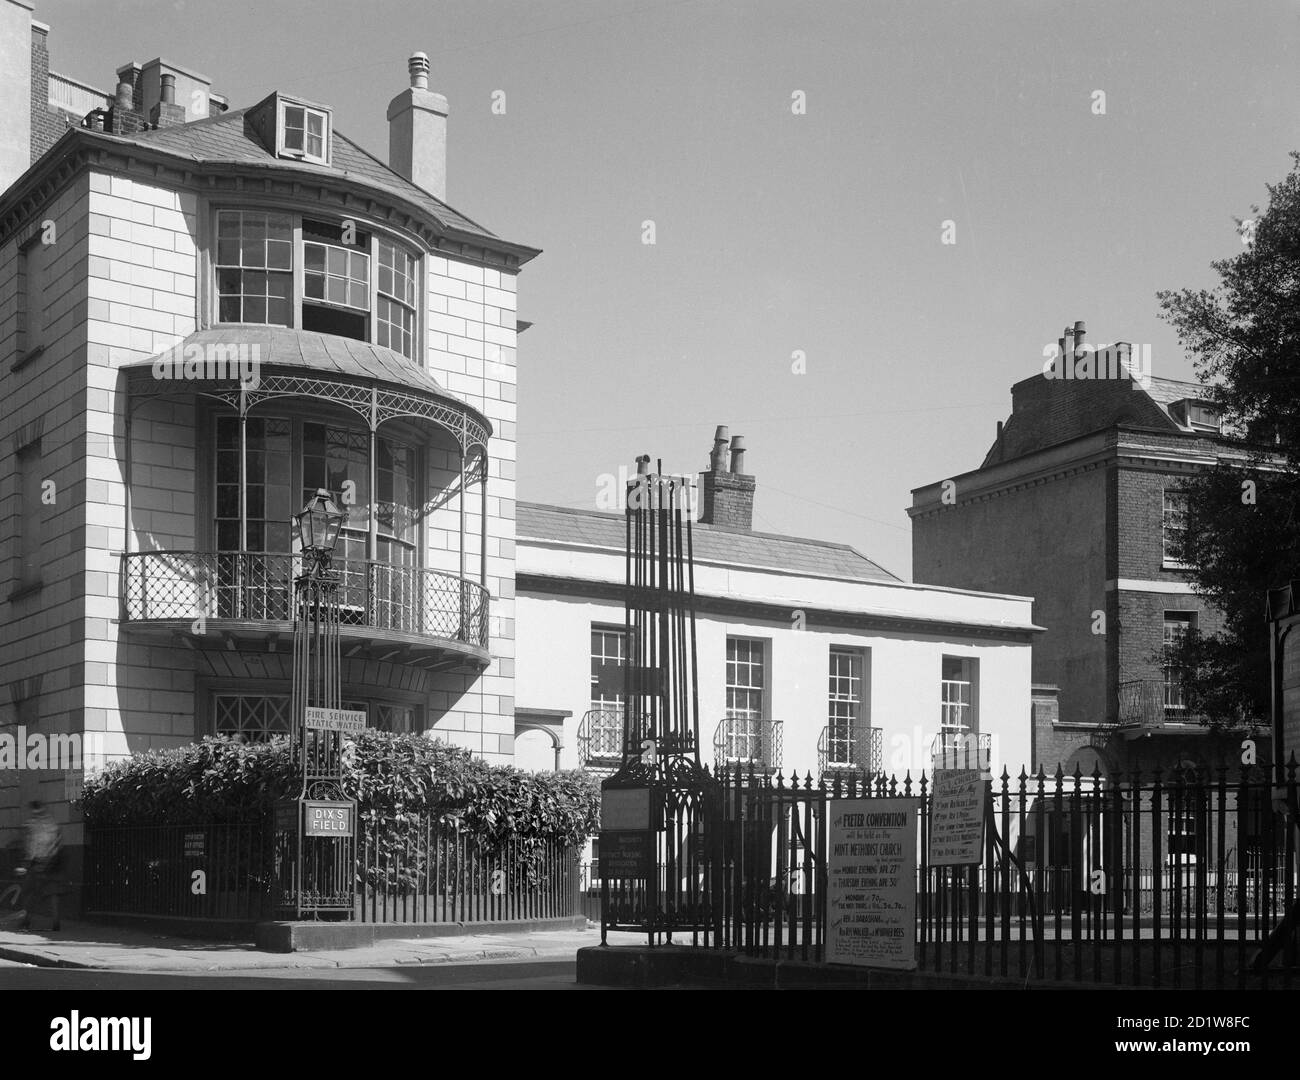 Exterior view of Regency style building, No. 1 Dix's Field in Exeter. Stock Photo